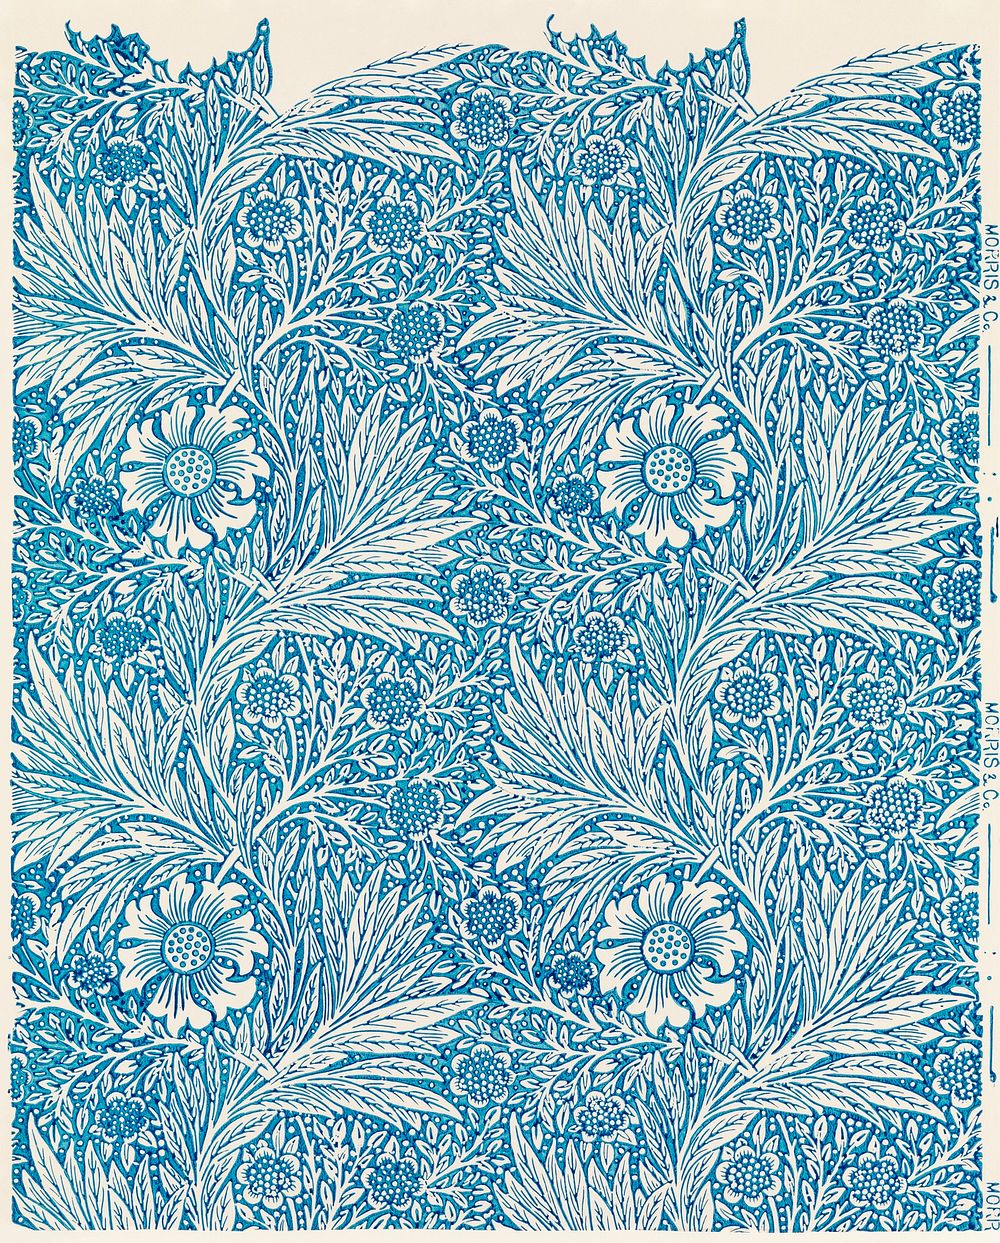 William Morris's (1834-1896) Blue Marigold famous pattern. Original from The MET Museum. Digitally enhanced by rawpixel.